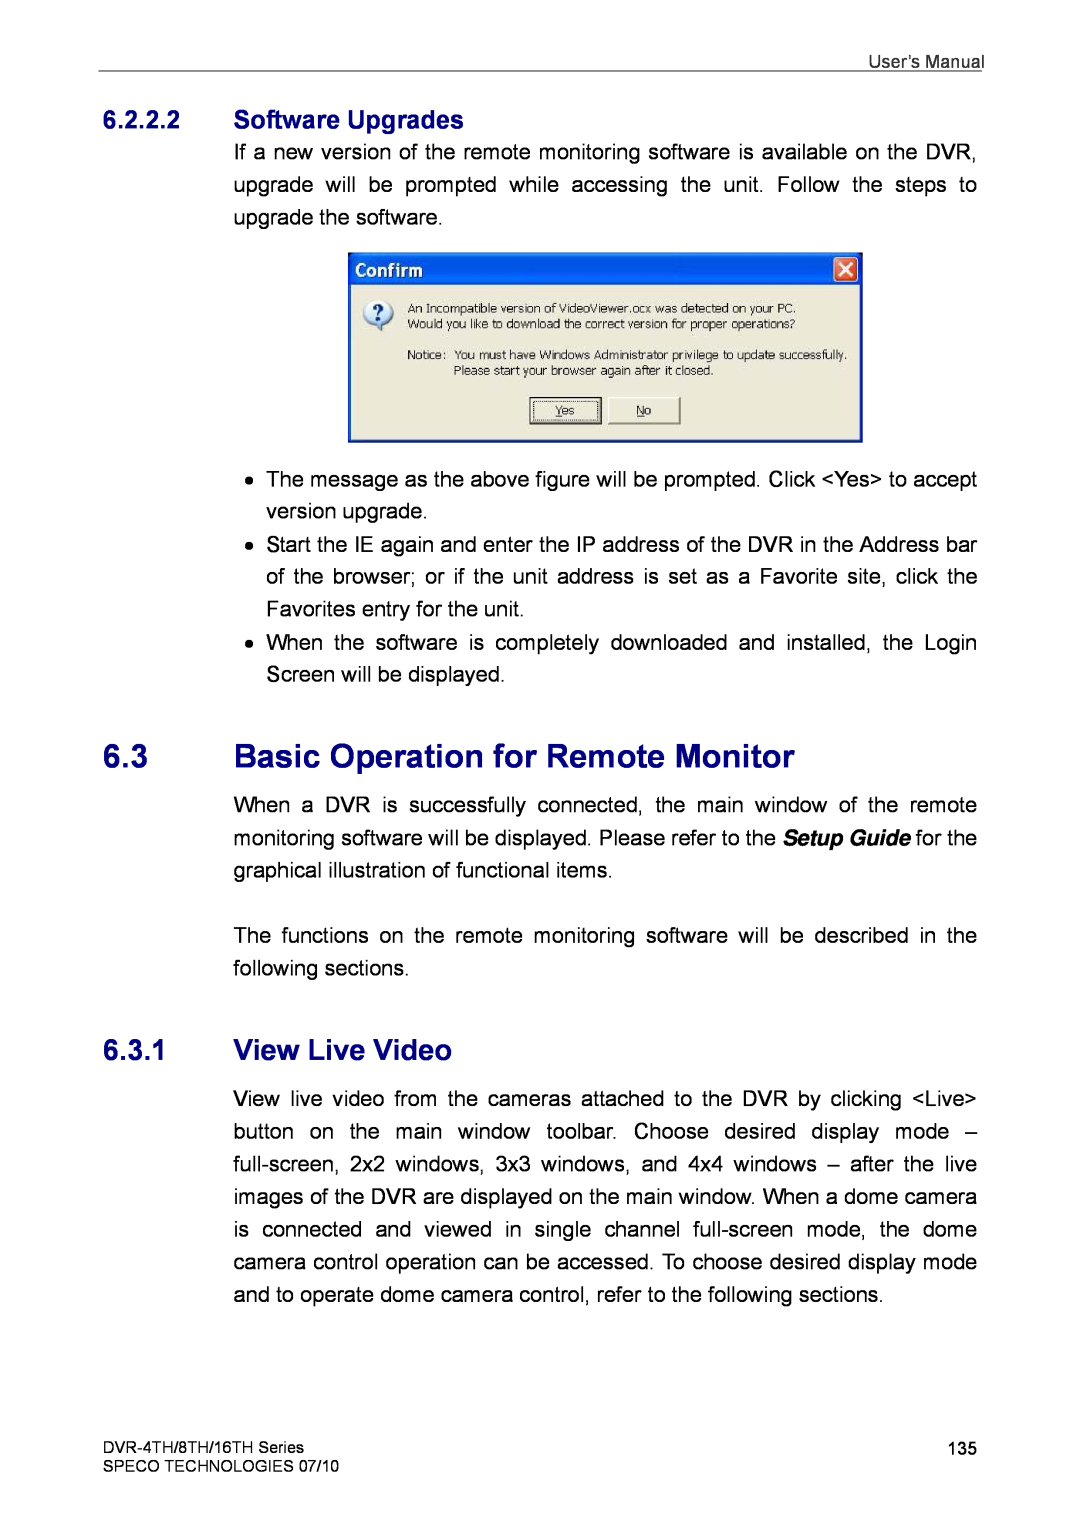 Speco Technologies 4TH, 8TH, 16TH user manual Basic Operation for Remote Monitor, View Live Video, Software Upgrades 